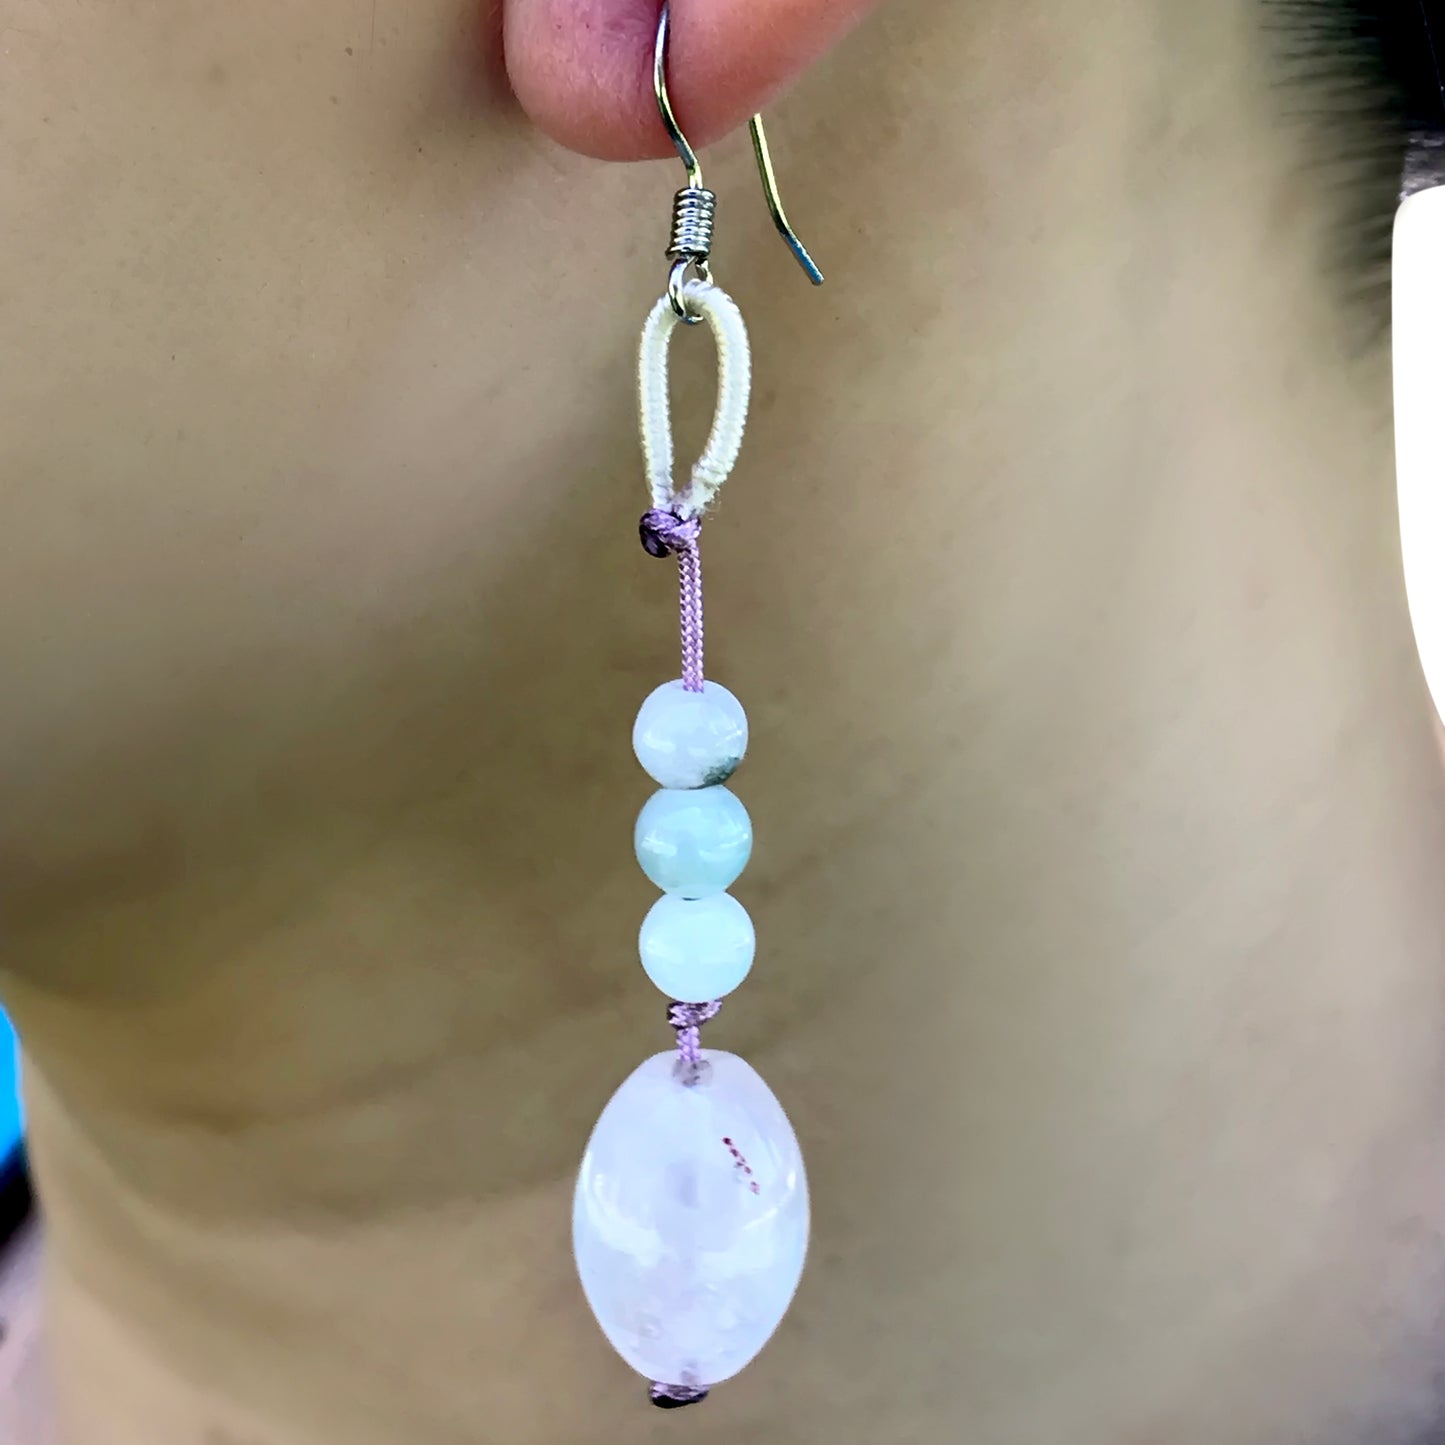 Stand Out with the Beautiful Elegant Oblong Rose Quartz Earrings made with Lavender Cord